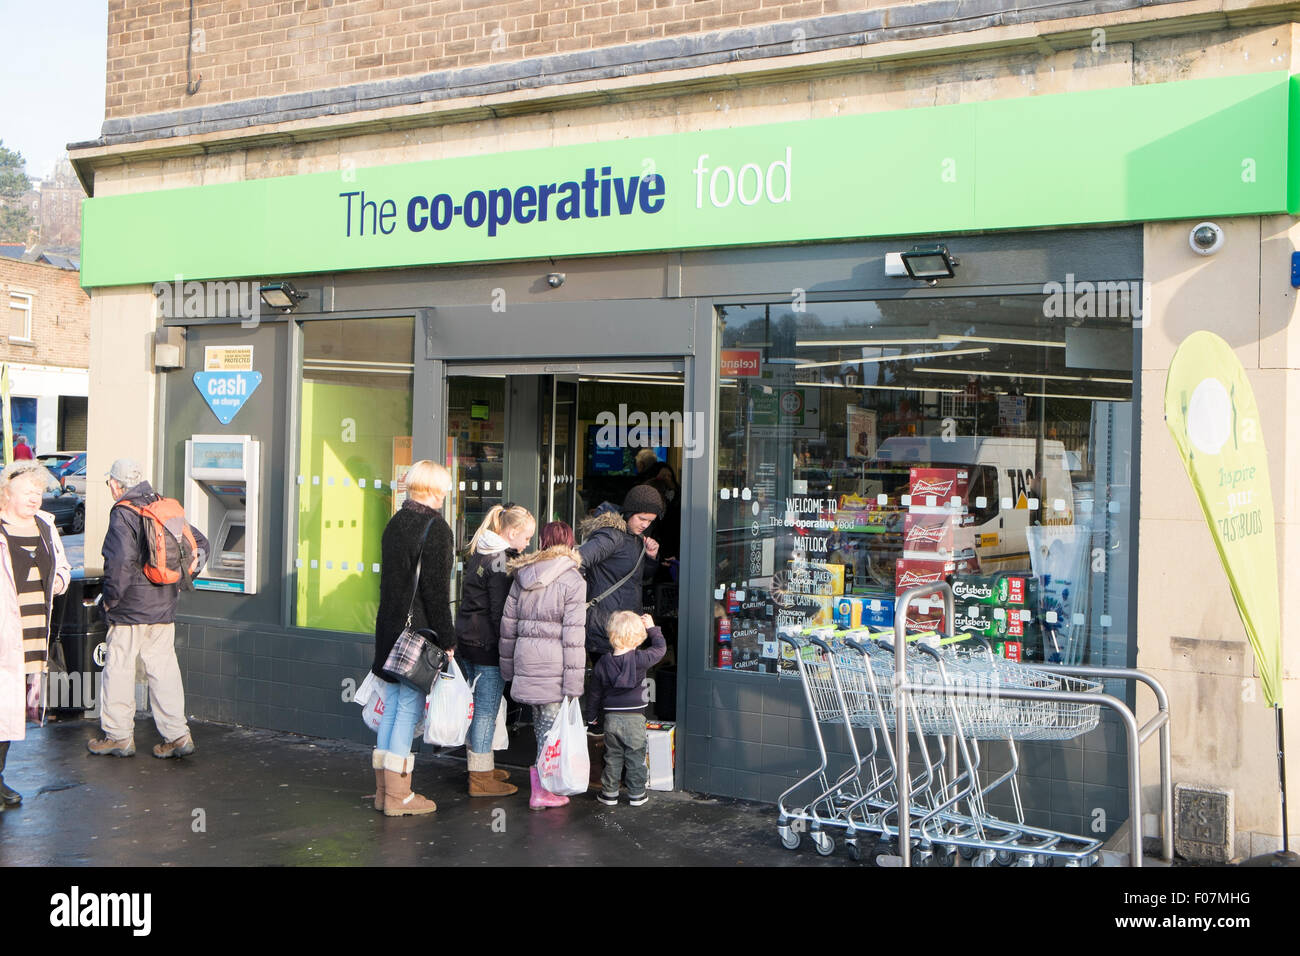 The co-operative food store in Bakewell,Derbyshire,England Stock Photo